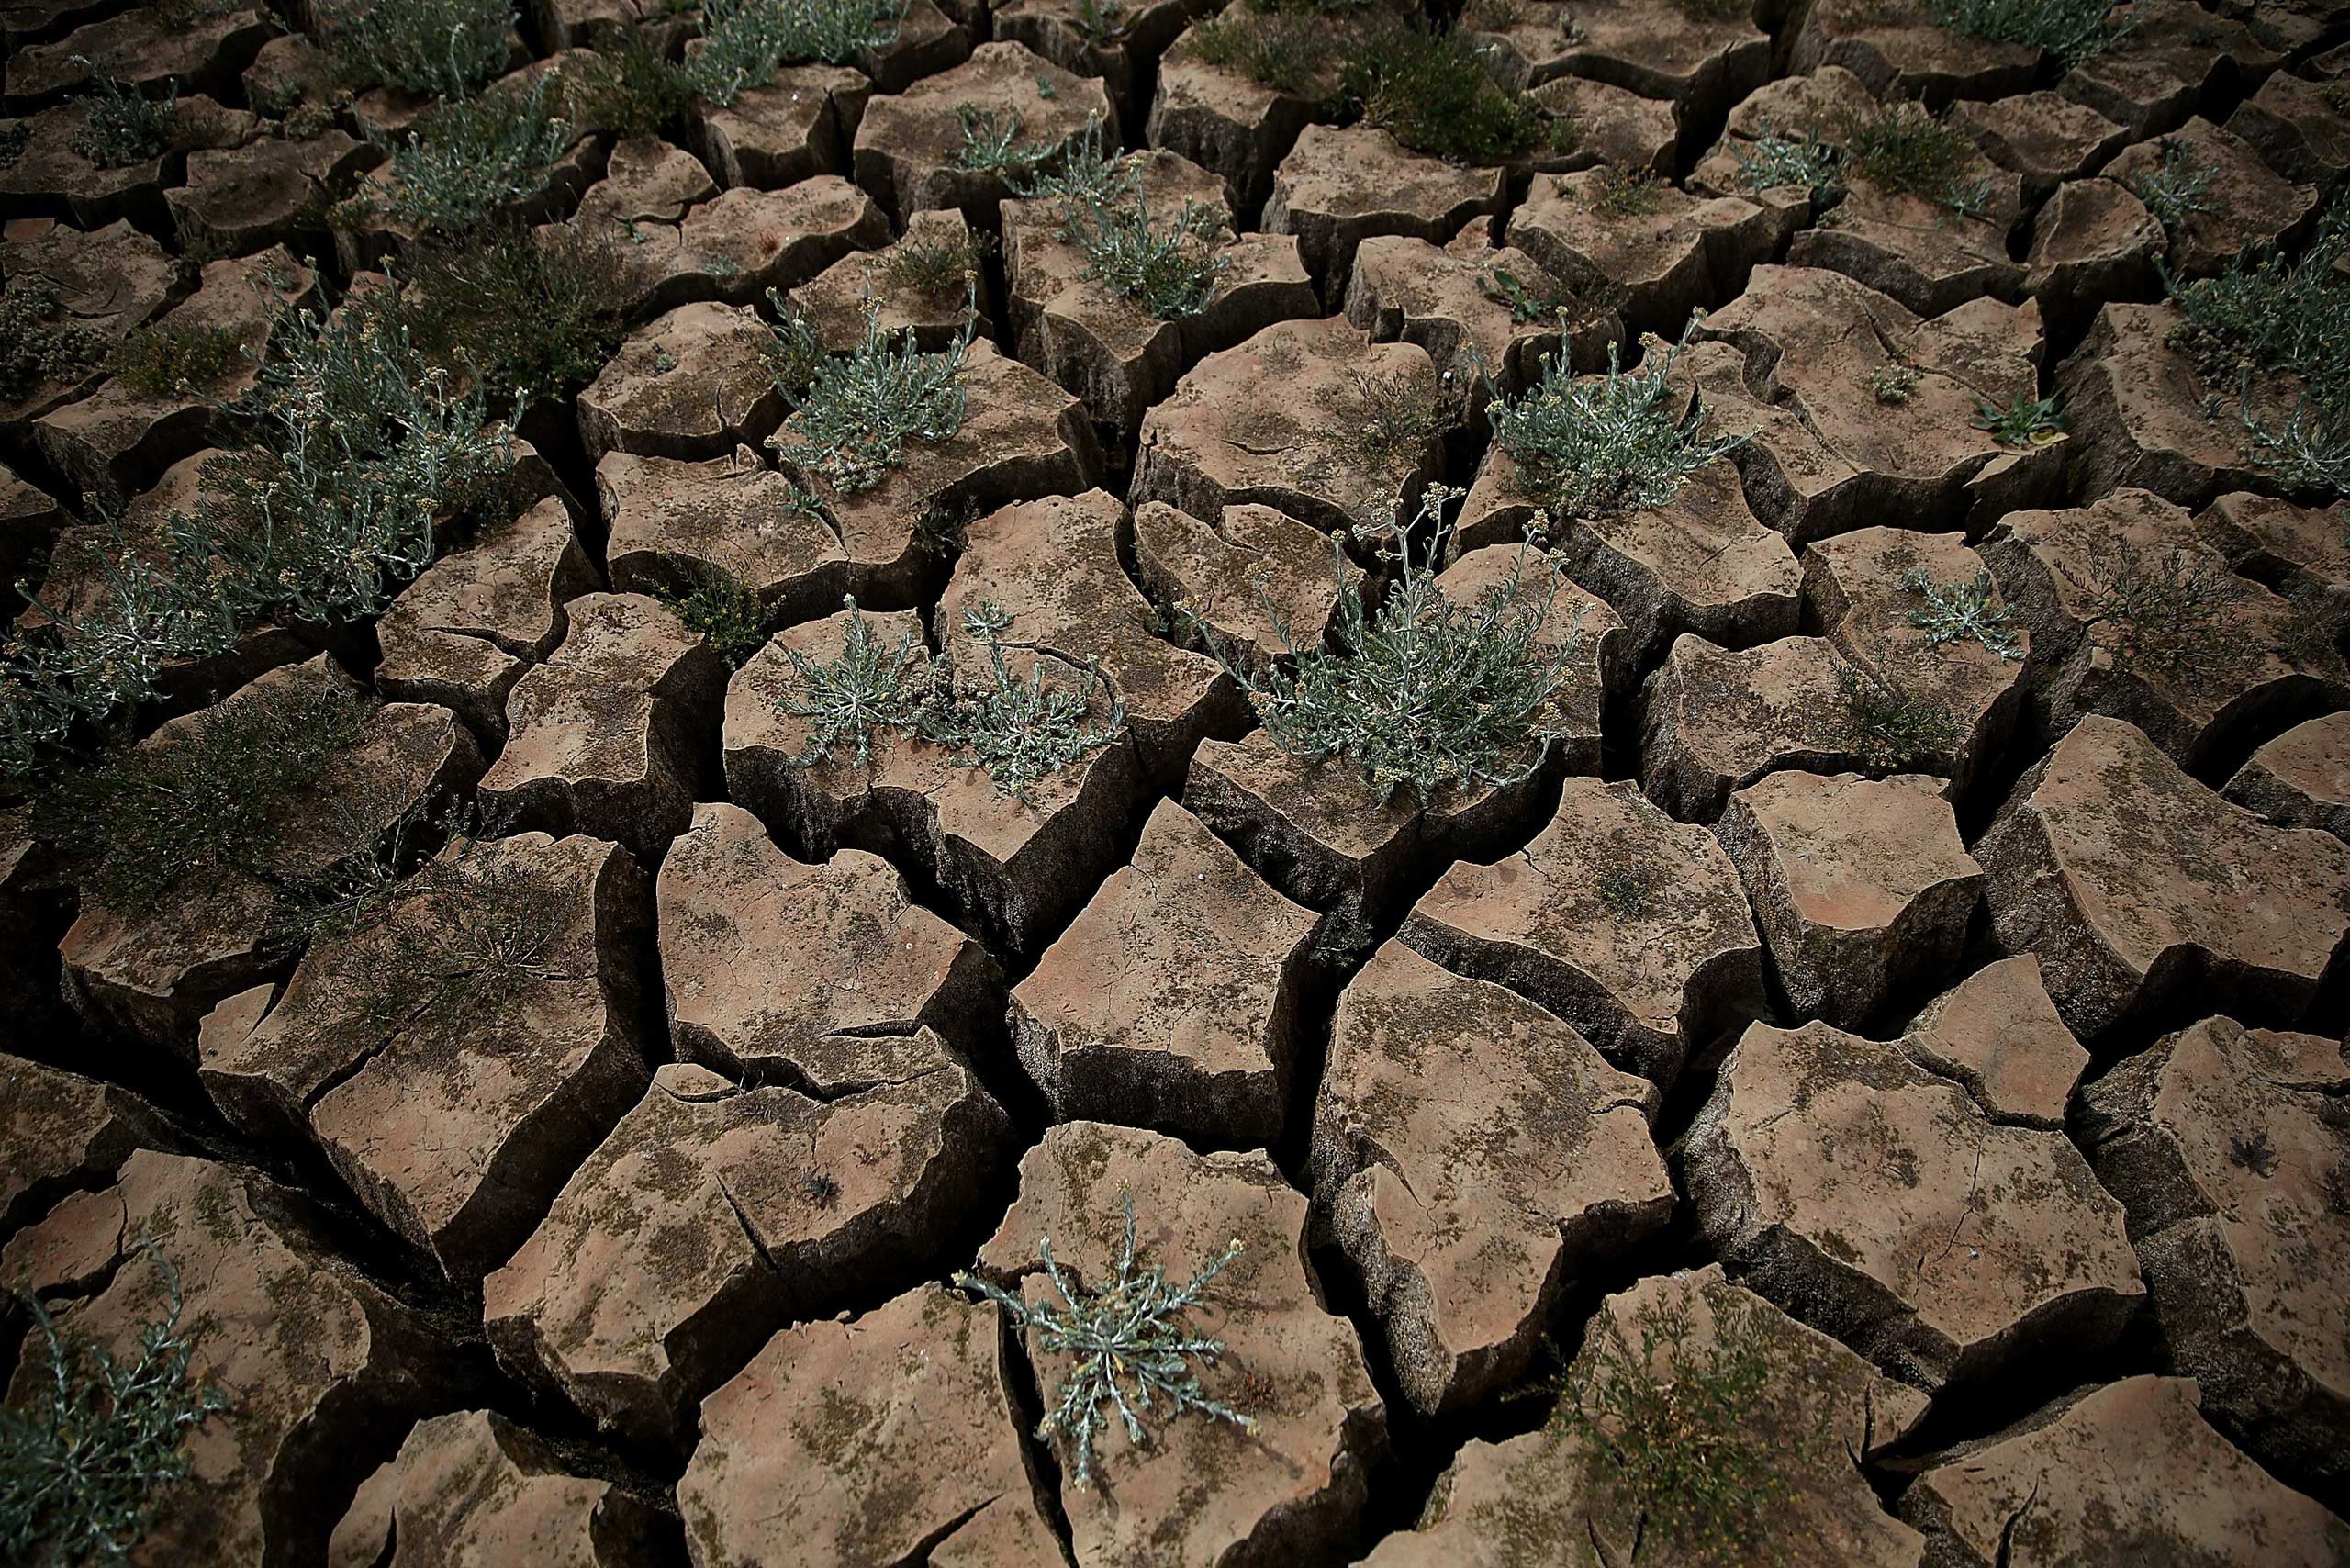 Weeds grow in dry cracked earth that used to be the bottom of Lake McClure in La Grange, California on March 24, 2015. (Justin Sullivan—Getty Images)